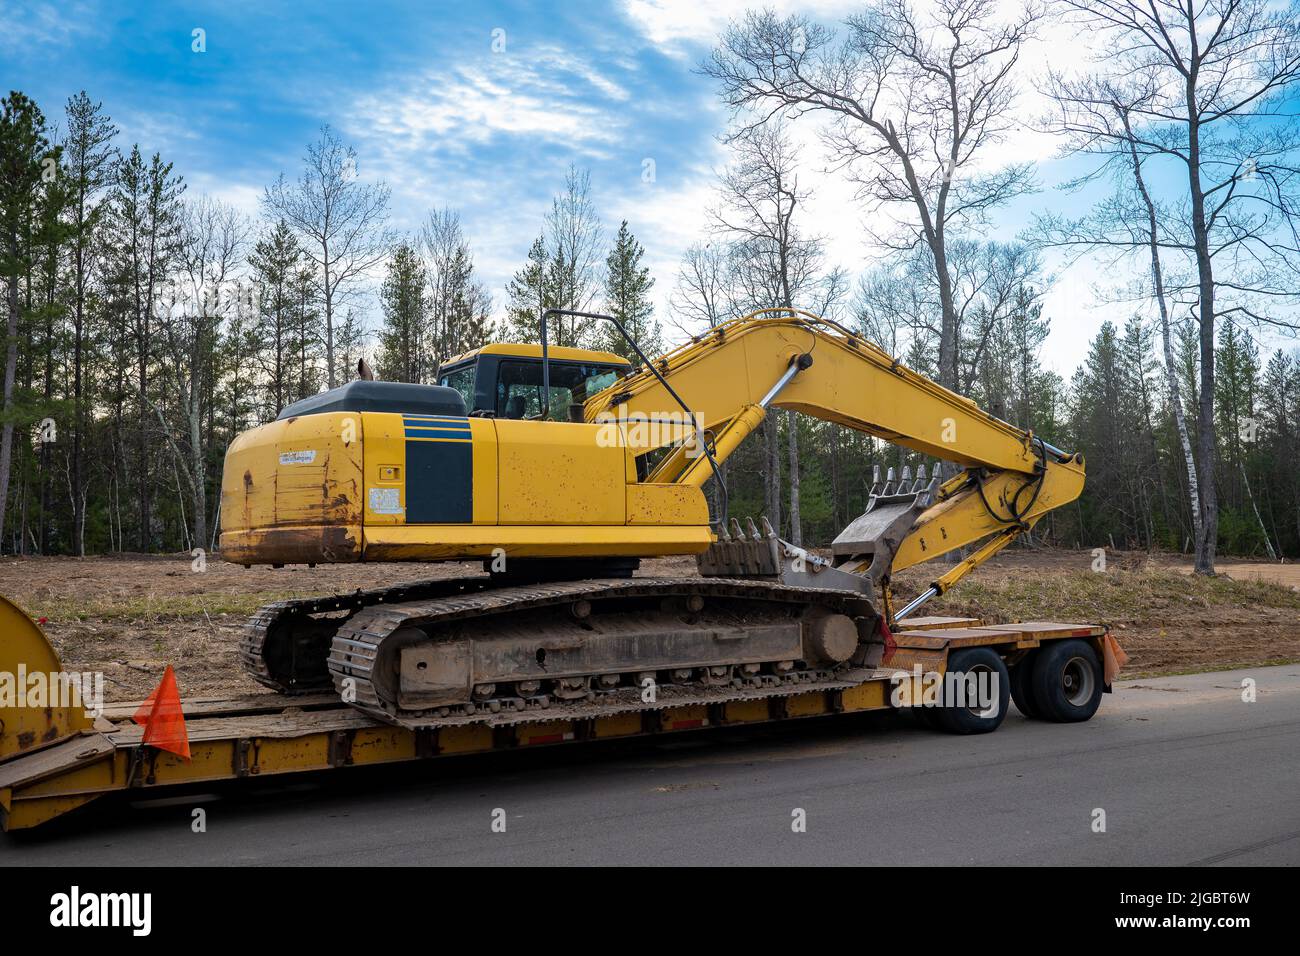 Used Yellow Skid Steer Excavator Loader on a flat bed trailer, at a construction job site, in evening light with trees in the background. Stock Photo